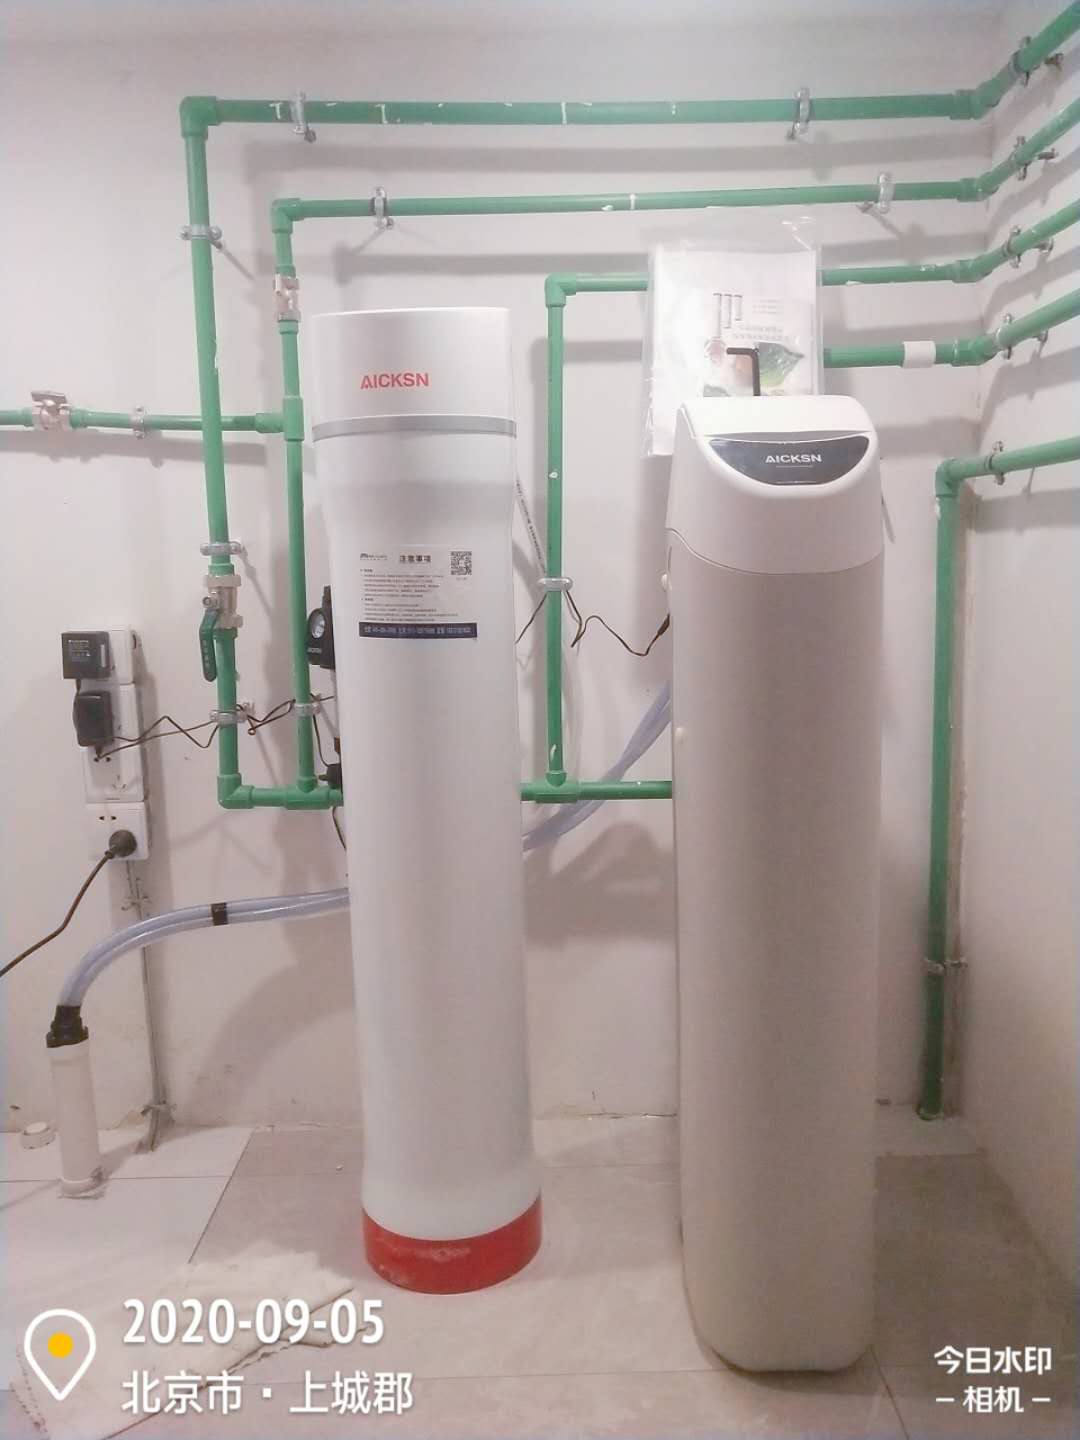 Water purification system installation